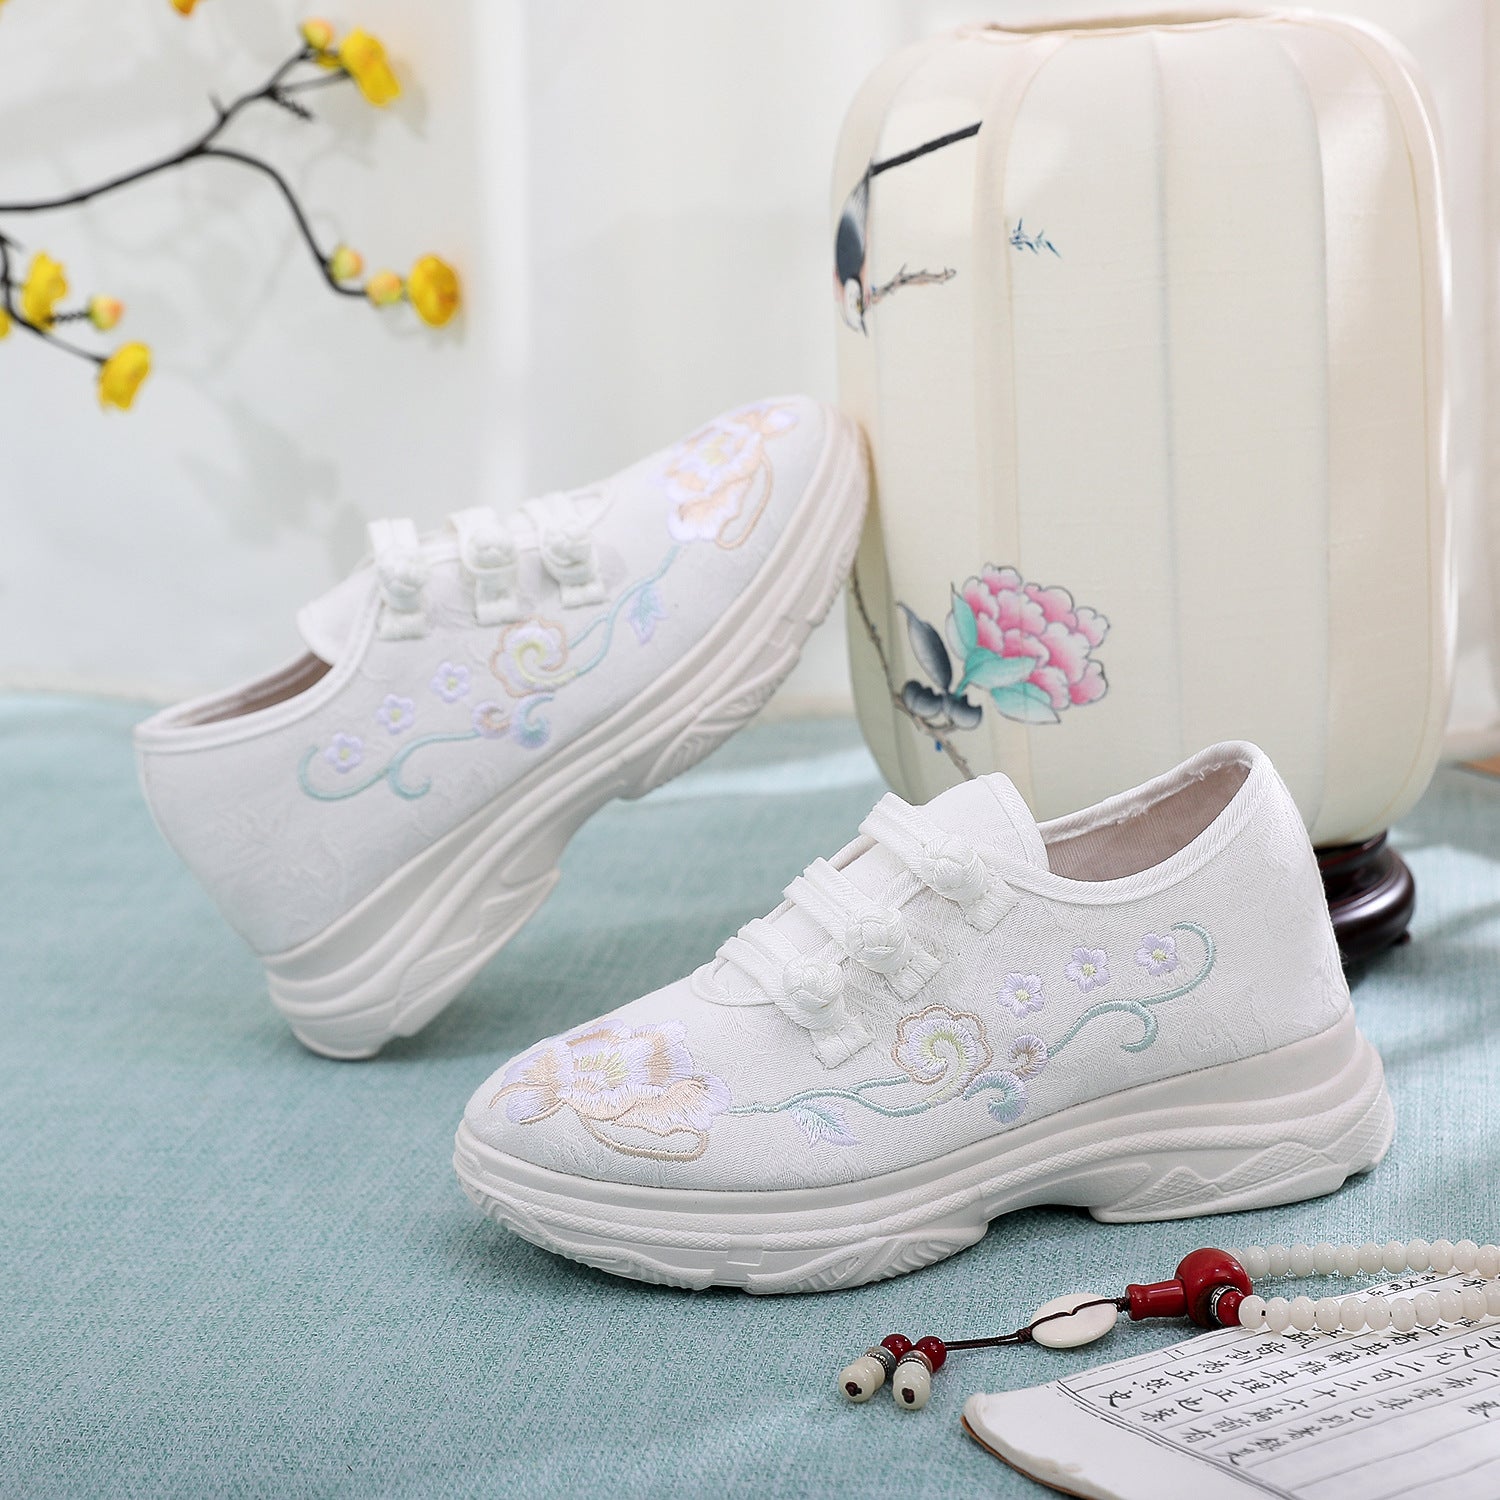 Arts Embroidered Thick Canvas Shoes